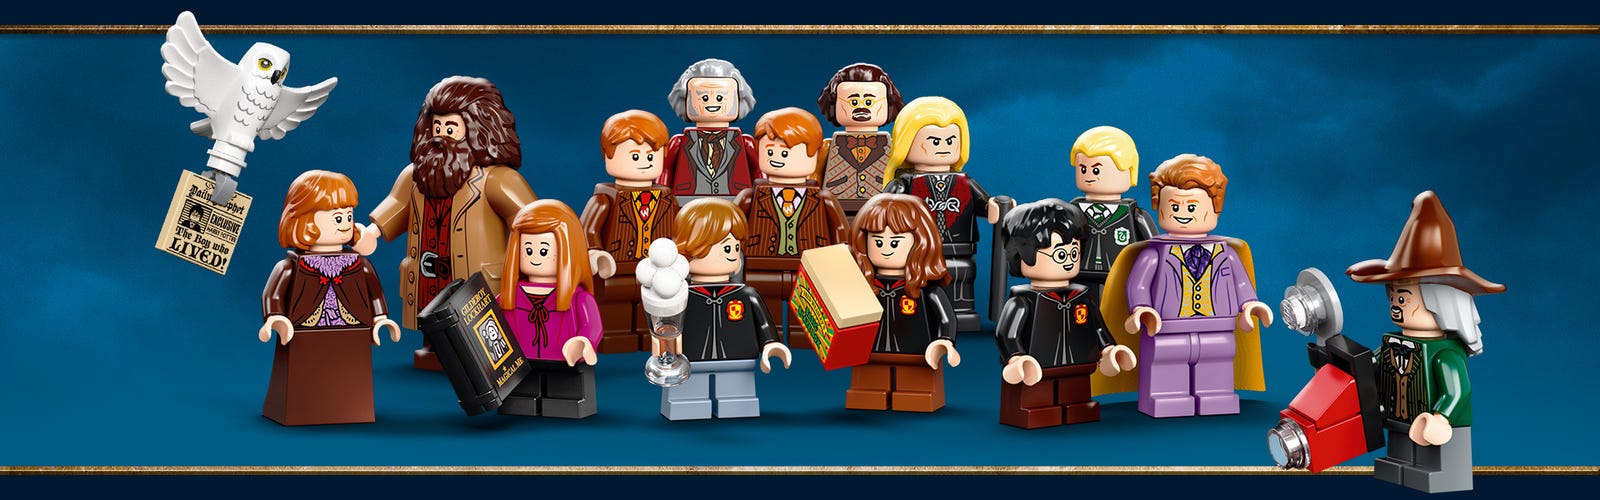 wizards of waverly place lego